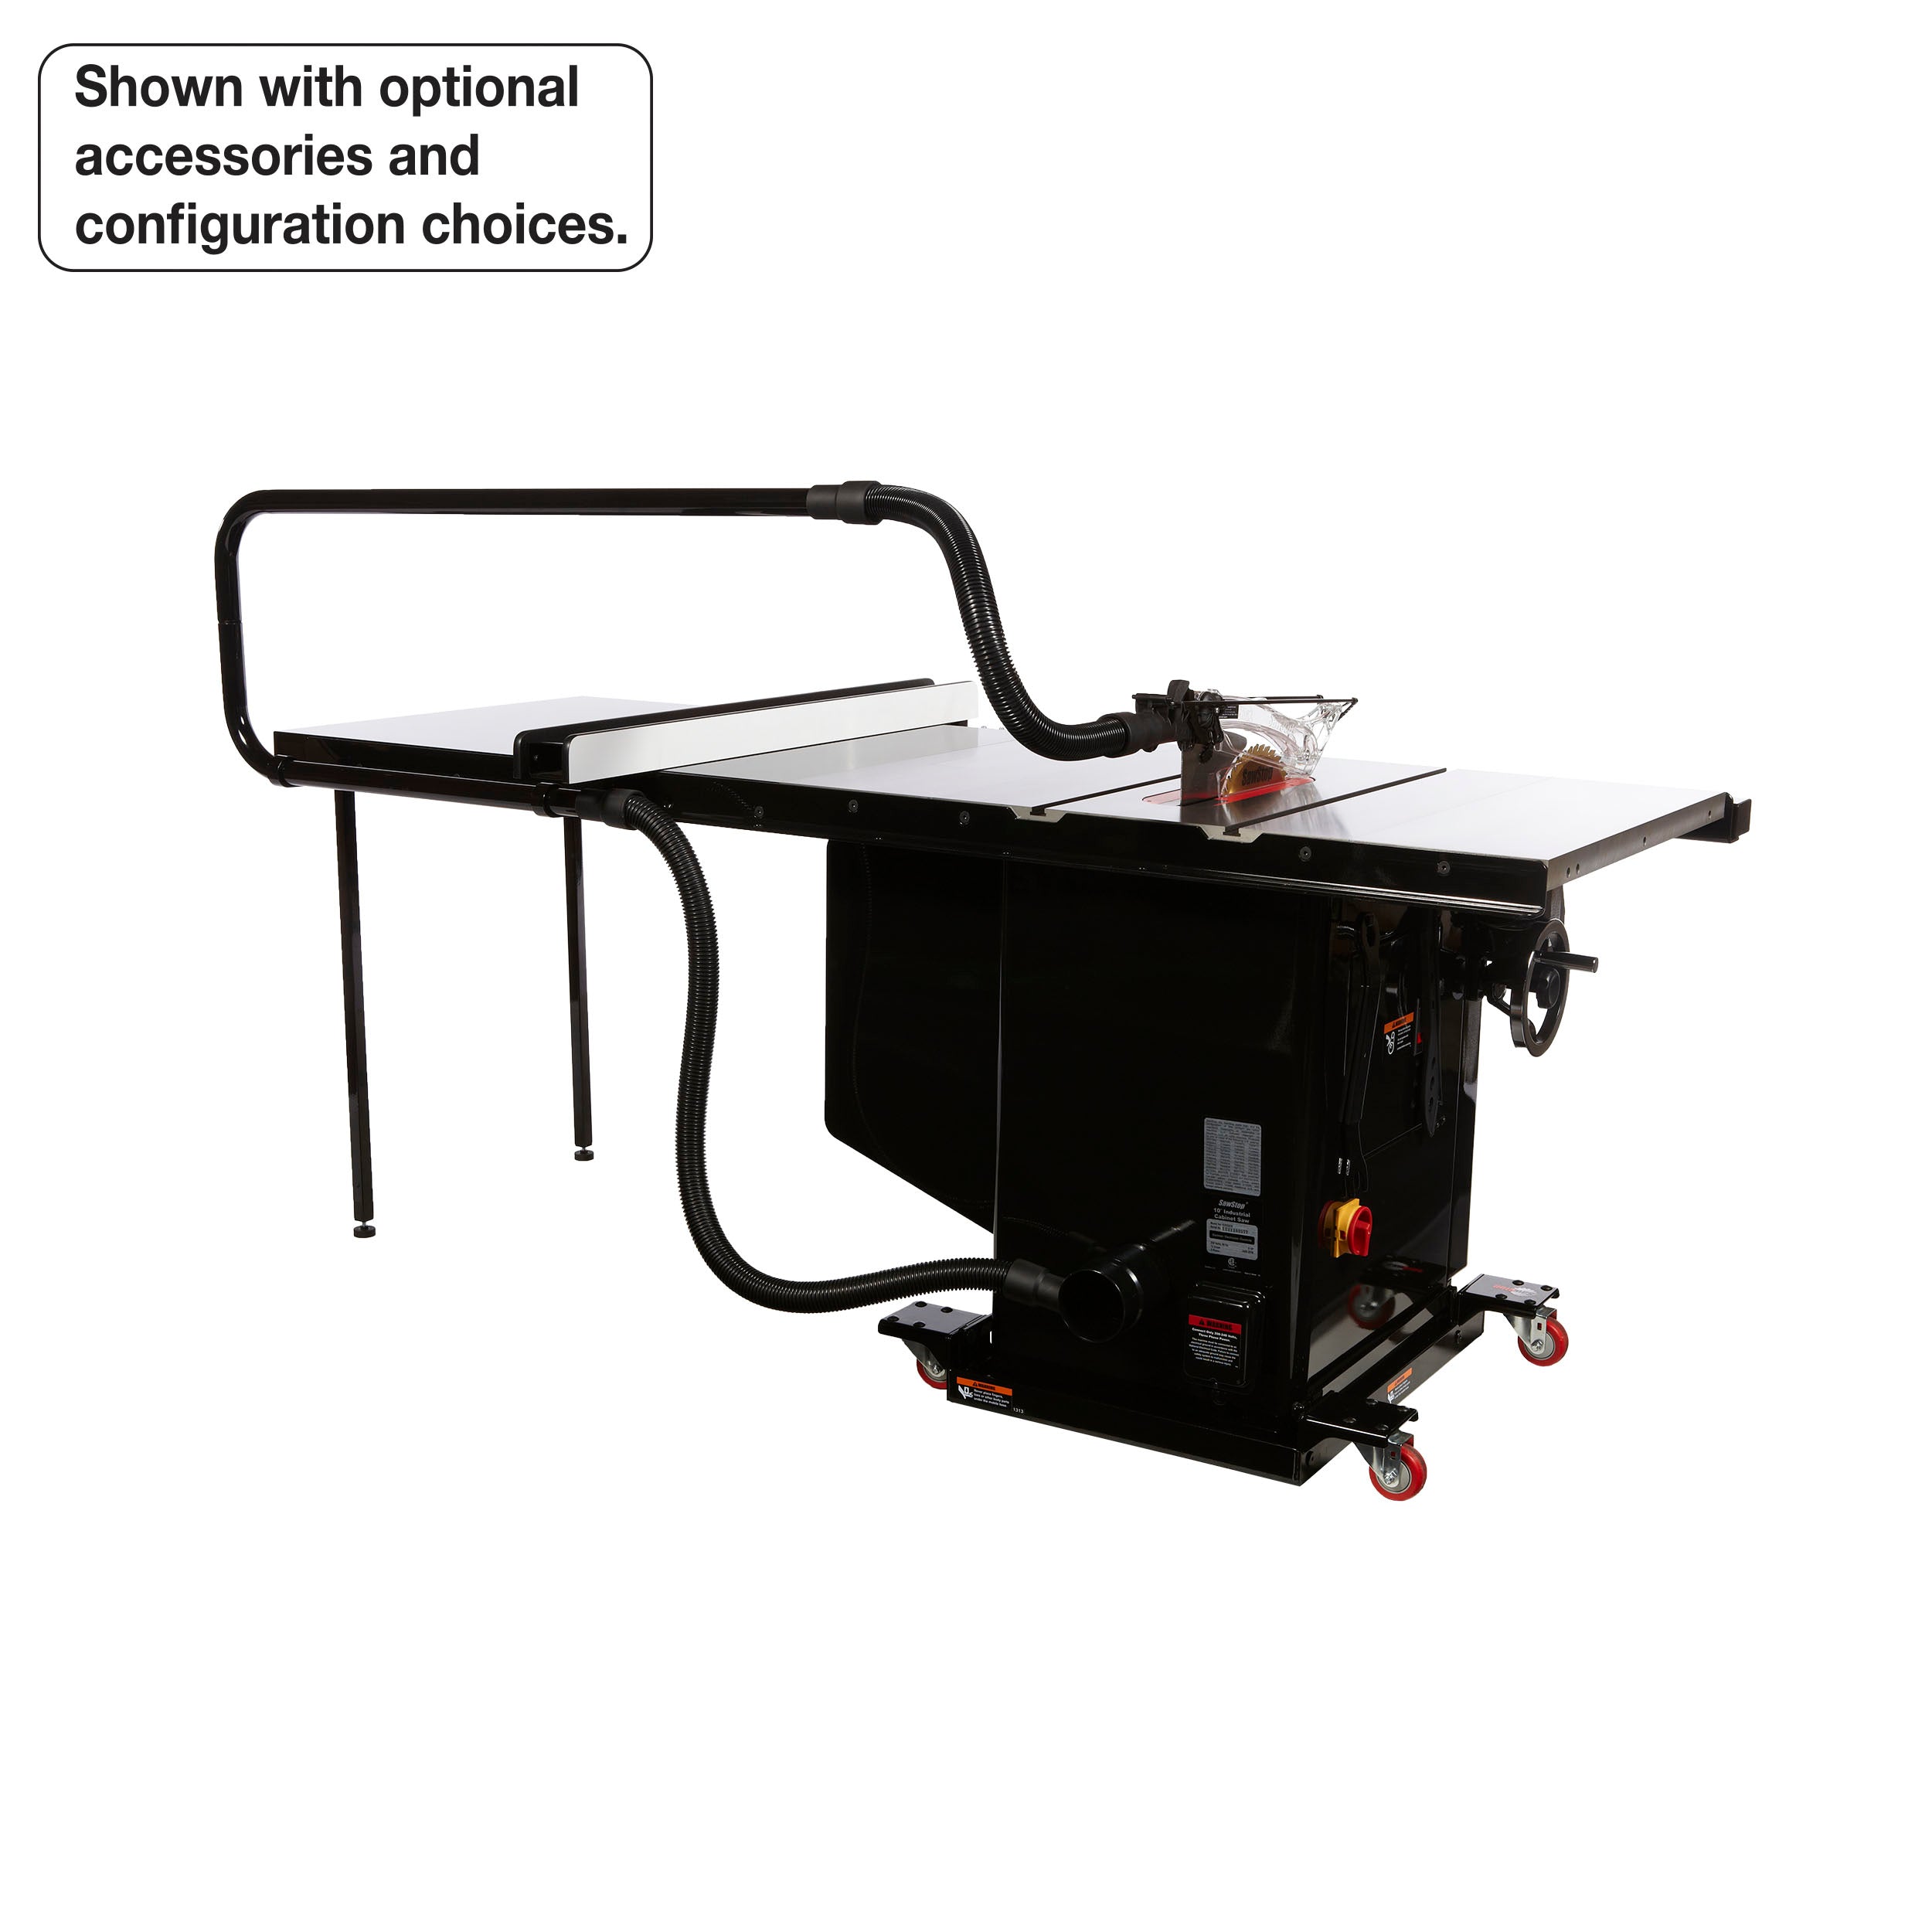 SawStop 7.5HP, 3ph, 230v Industrial Cabinet Saw w/ 52